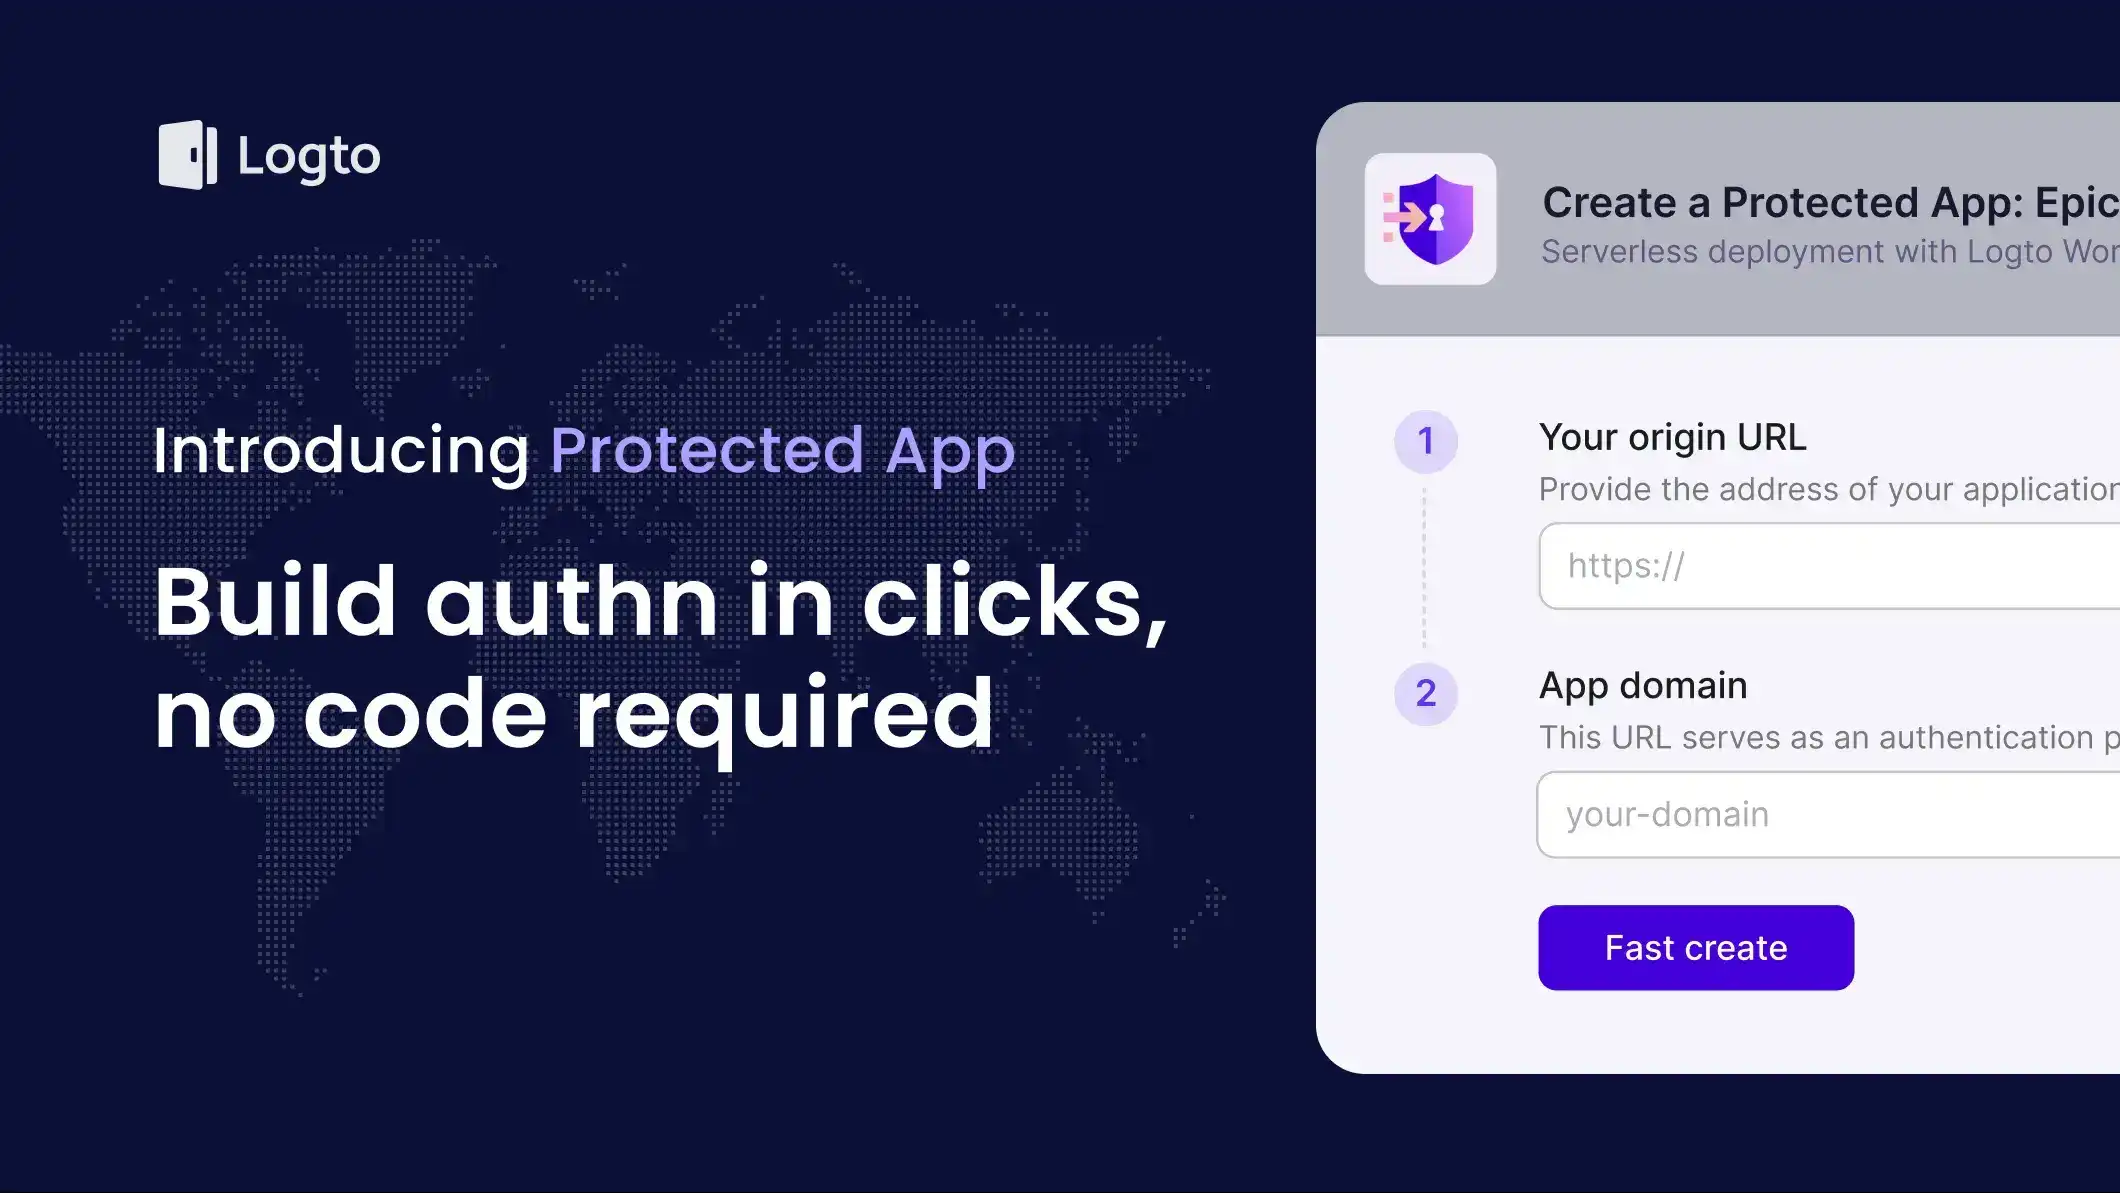 Introducing Protected App: Build authentication in clicks, no code required